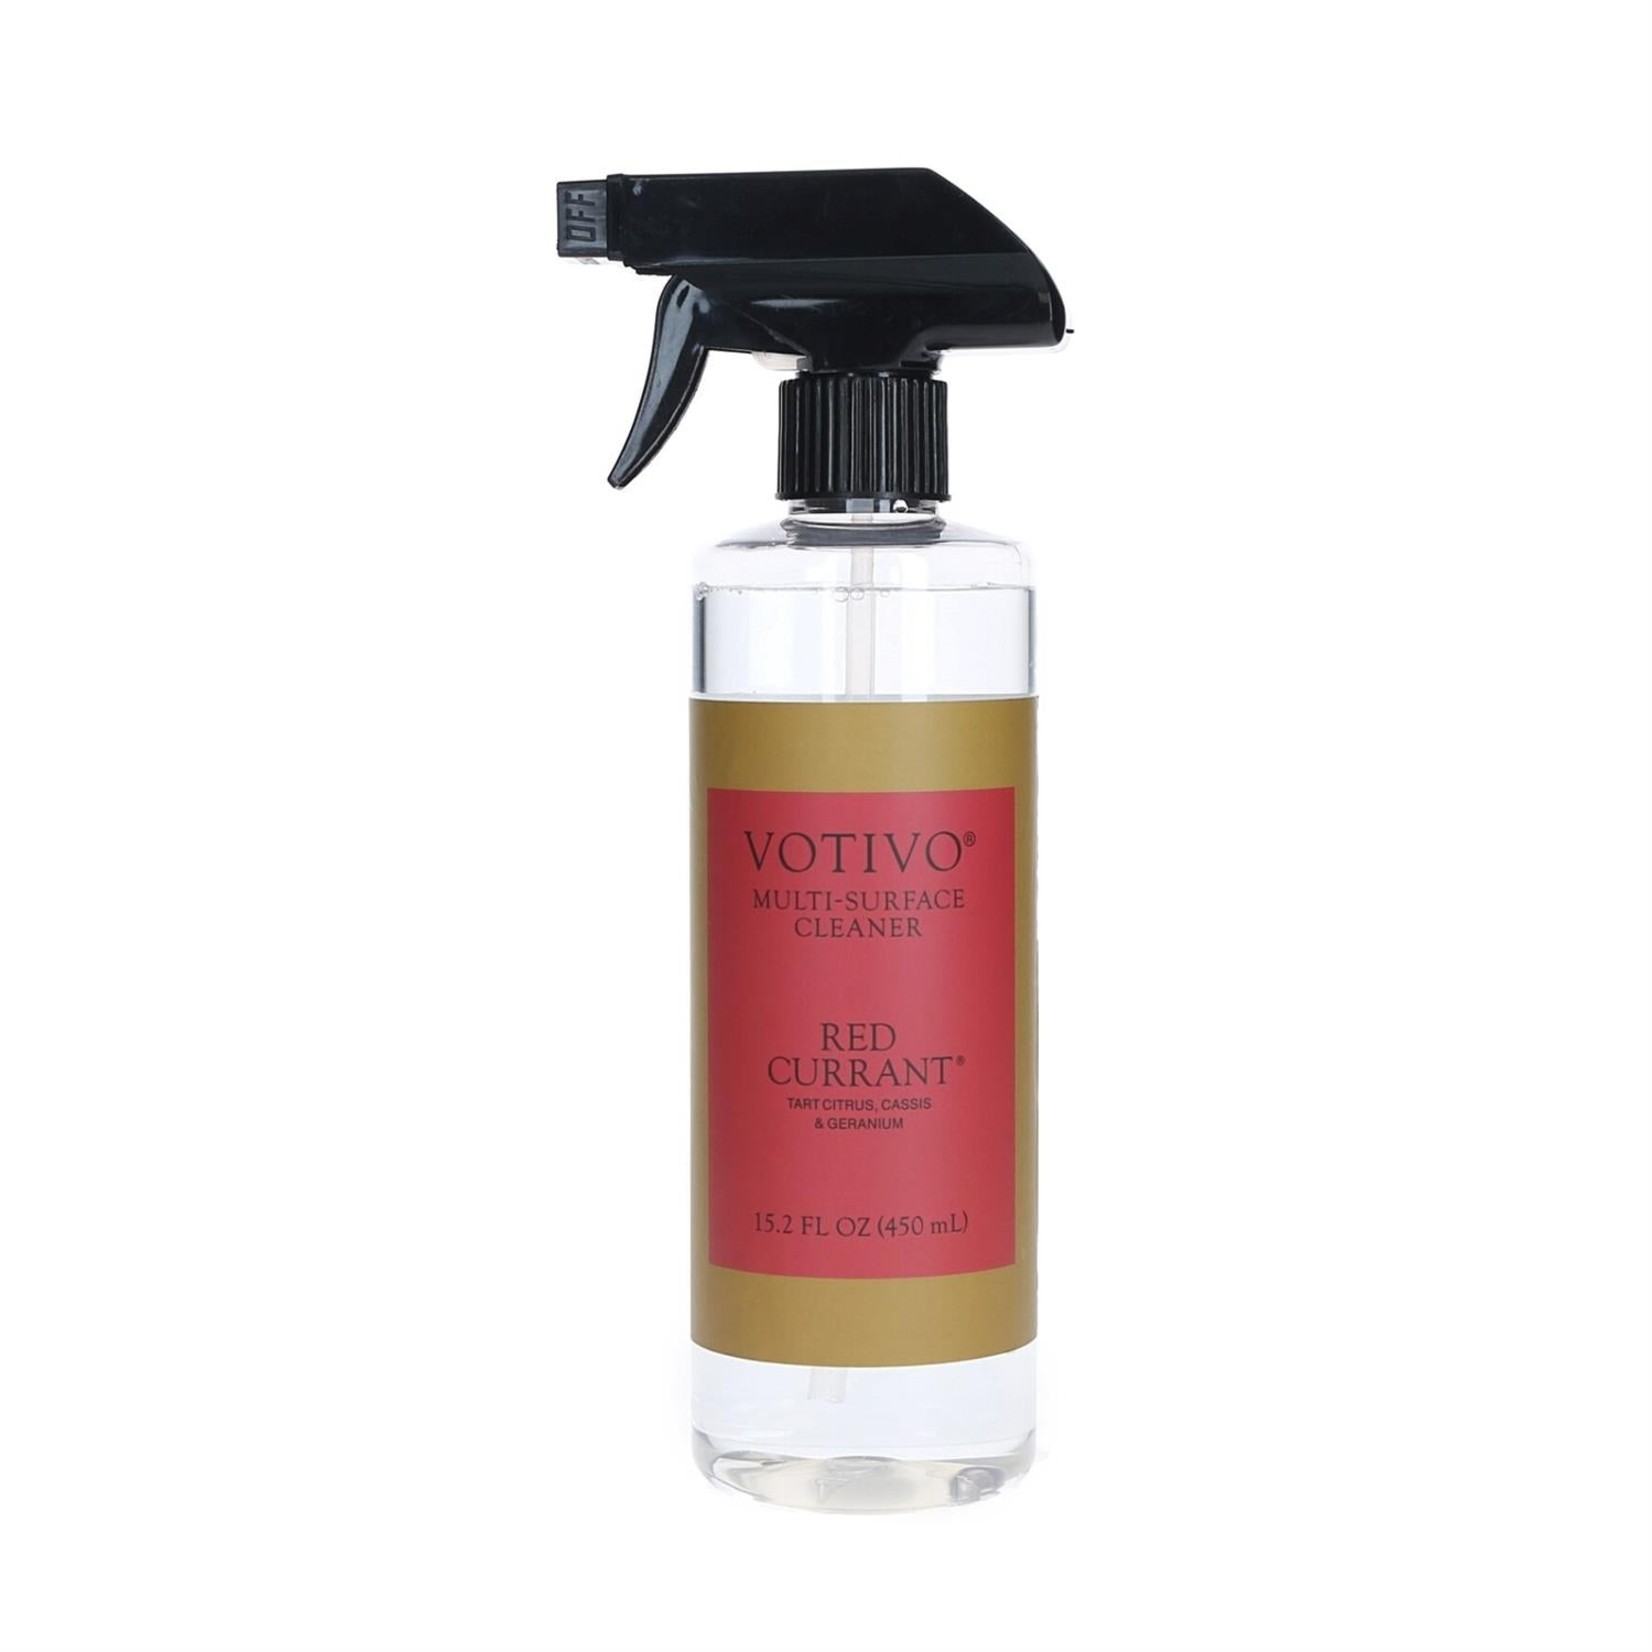 Votivo Multi-Surface Cleaner-Red Currant